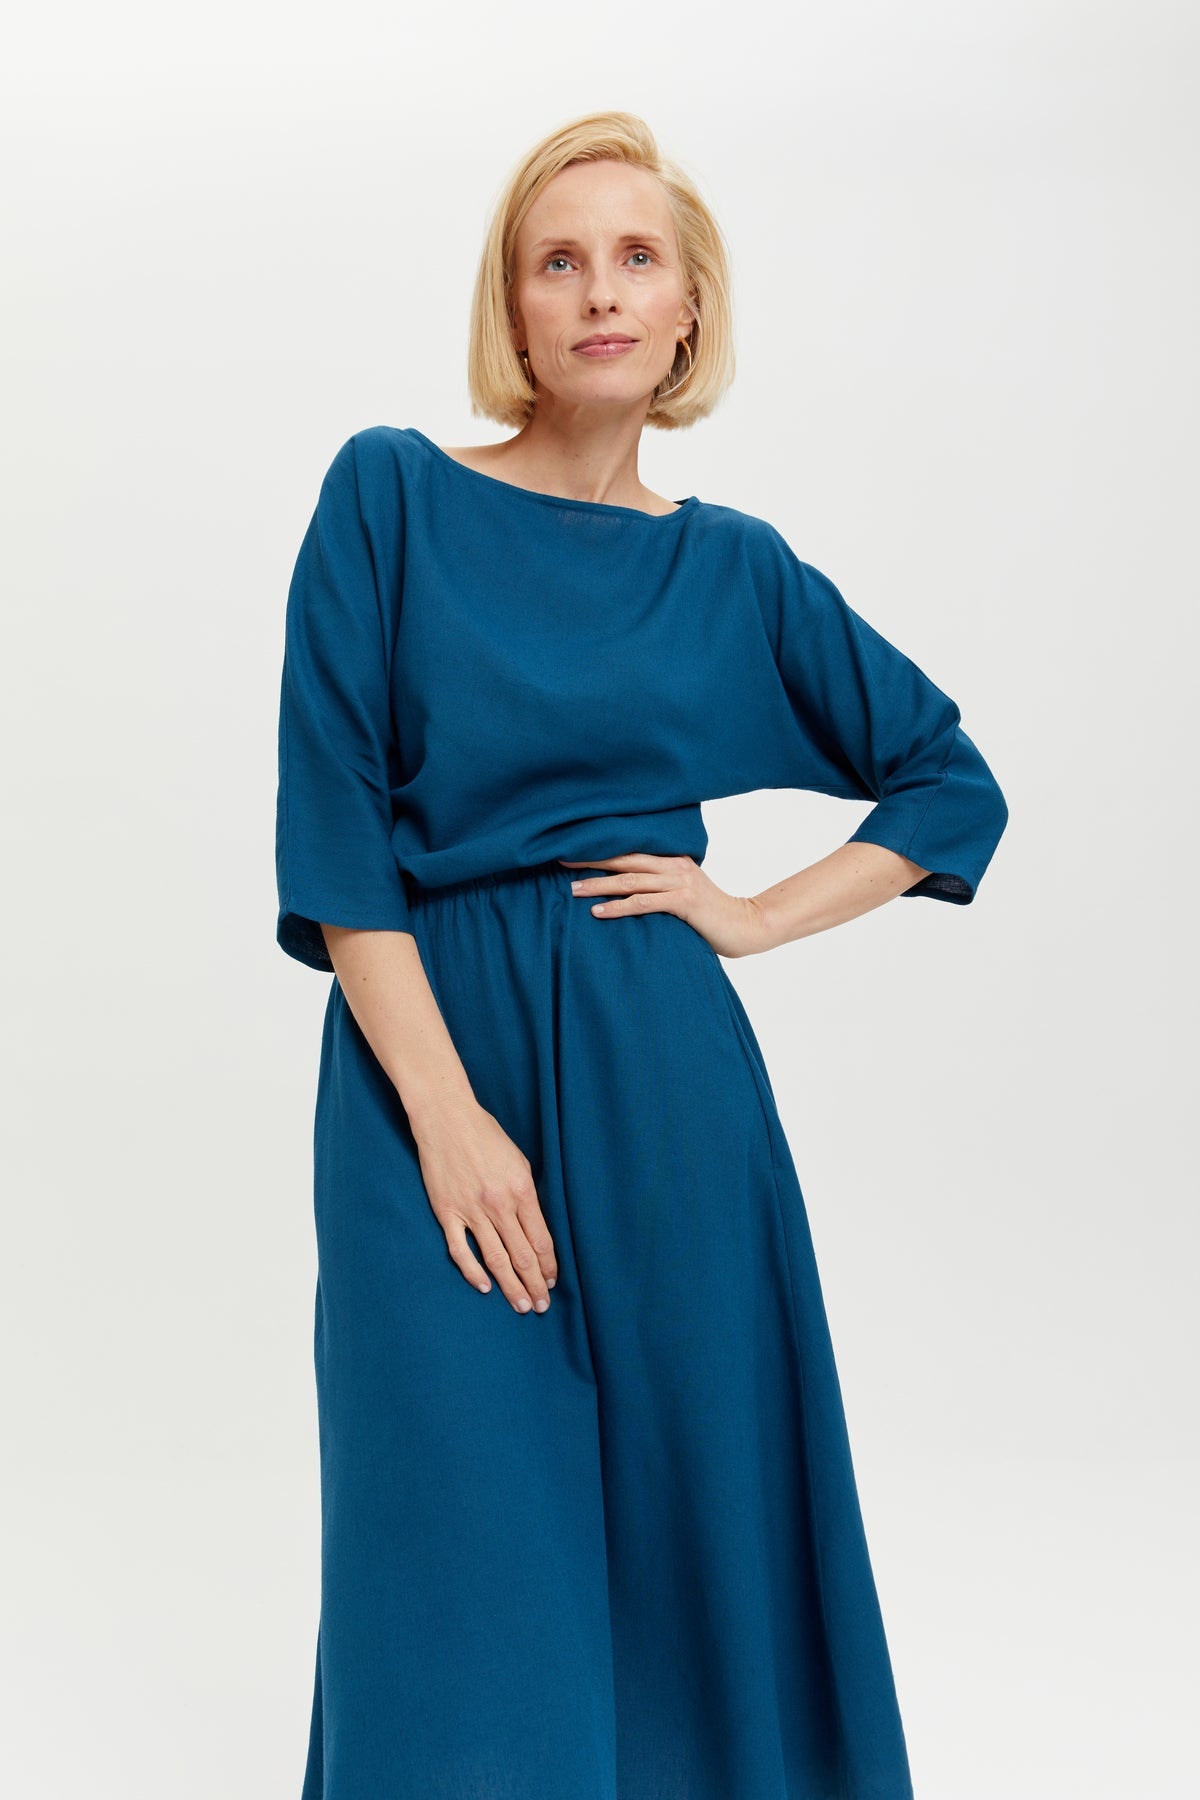 Nane | Linen dress with 3/4 sleeves in petrol blue by Ayani